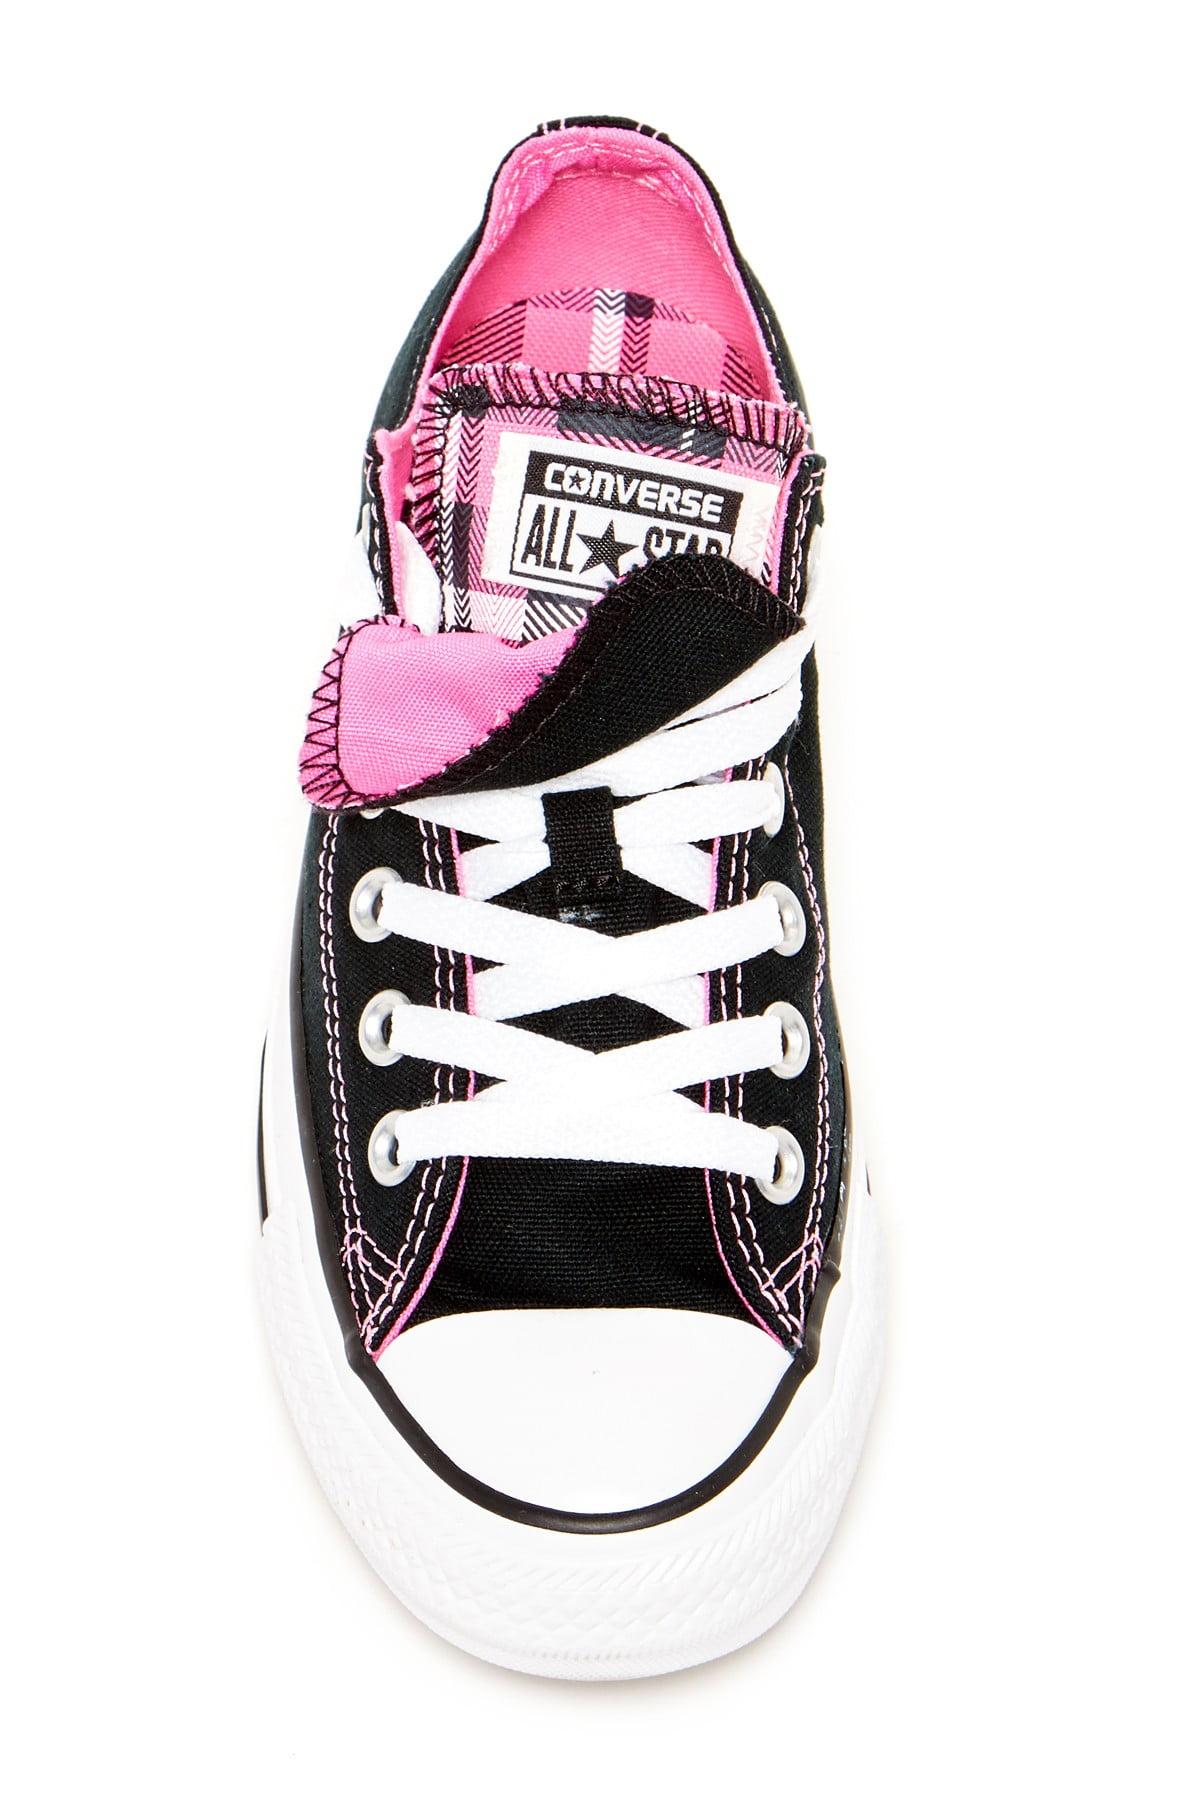 Converse Chuck Taylor Double Tongue Sneaker in Pink - Lyst